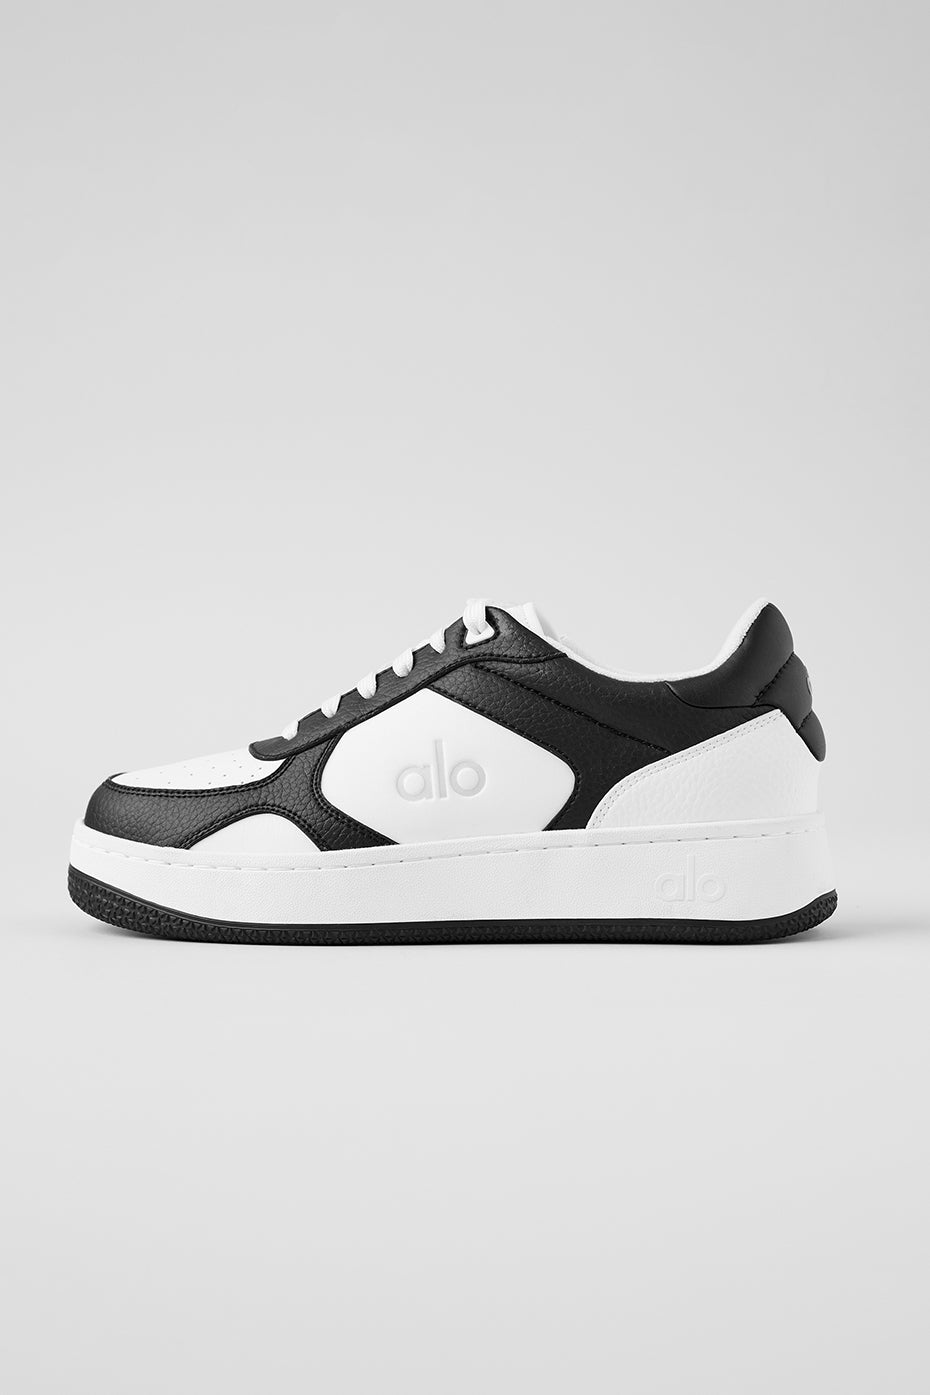 Alo Shoes Review